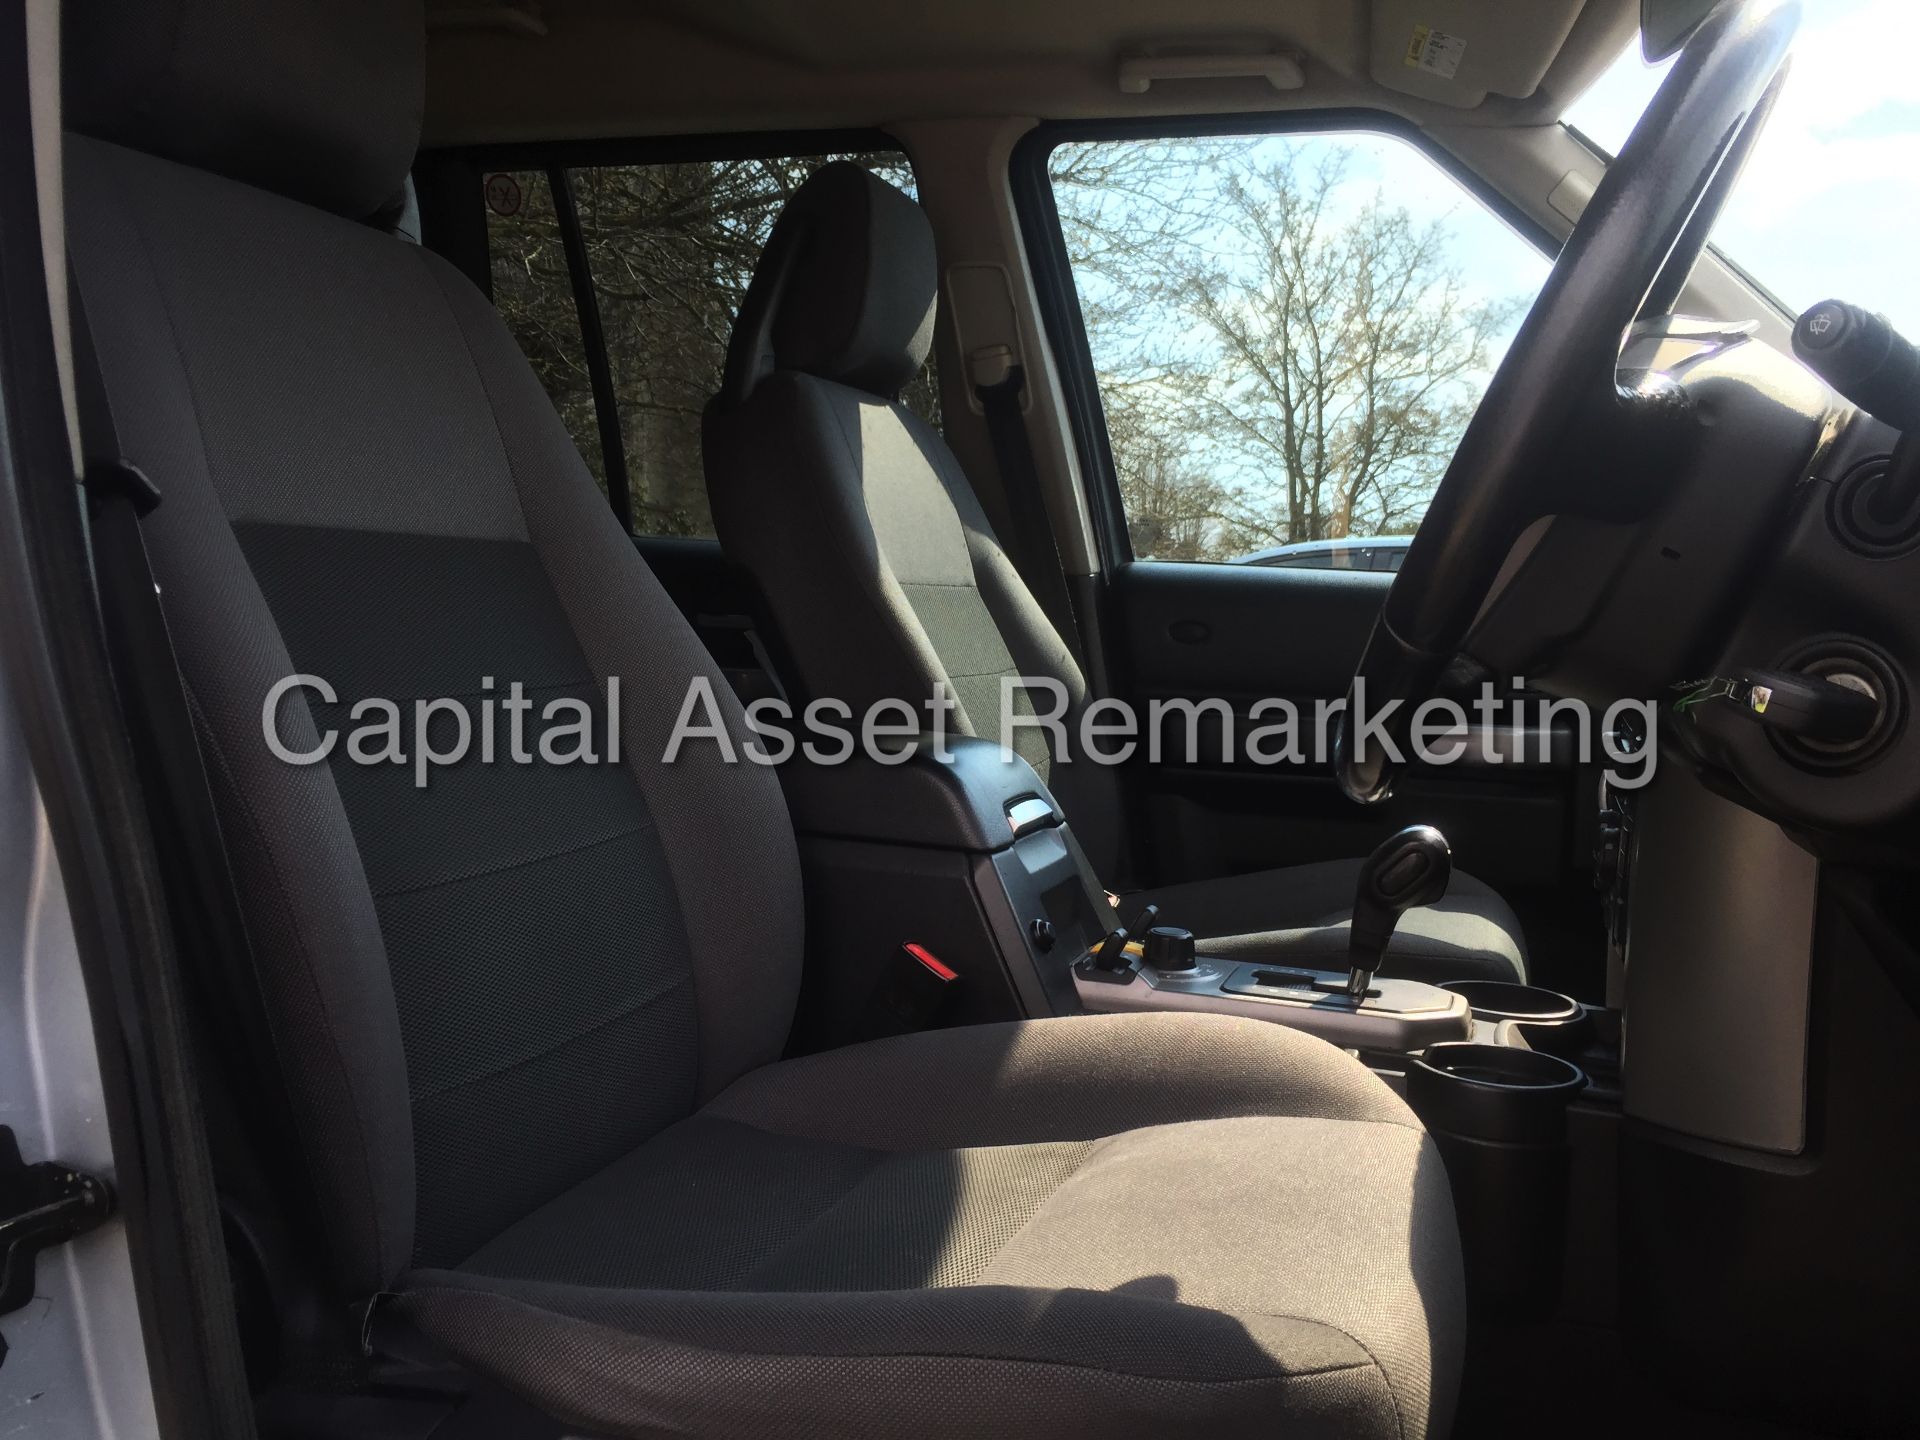 (ON SALE) LAND ROVER DISCOVERY (2009 - 09 REG) 2.7 TDV6 - AUTO - 7 SEATER - AIR SUSPENSION (NO VAT) - Image 23 of 26